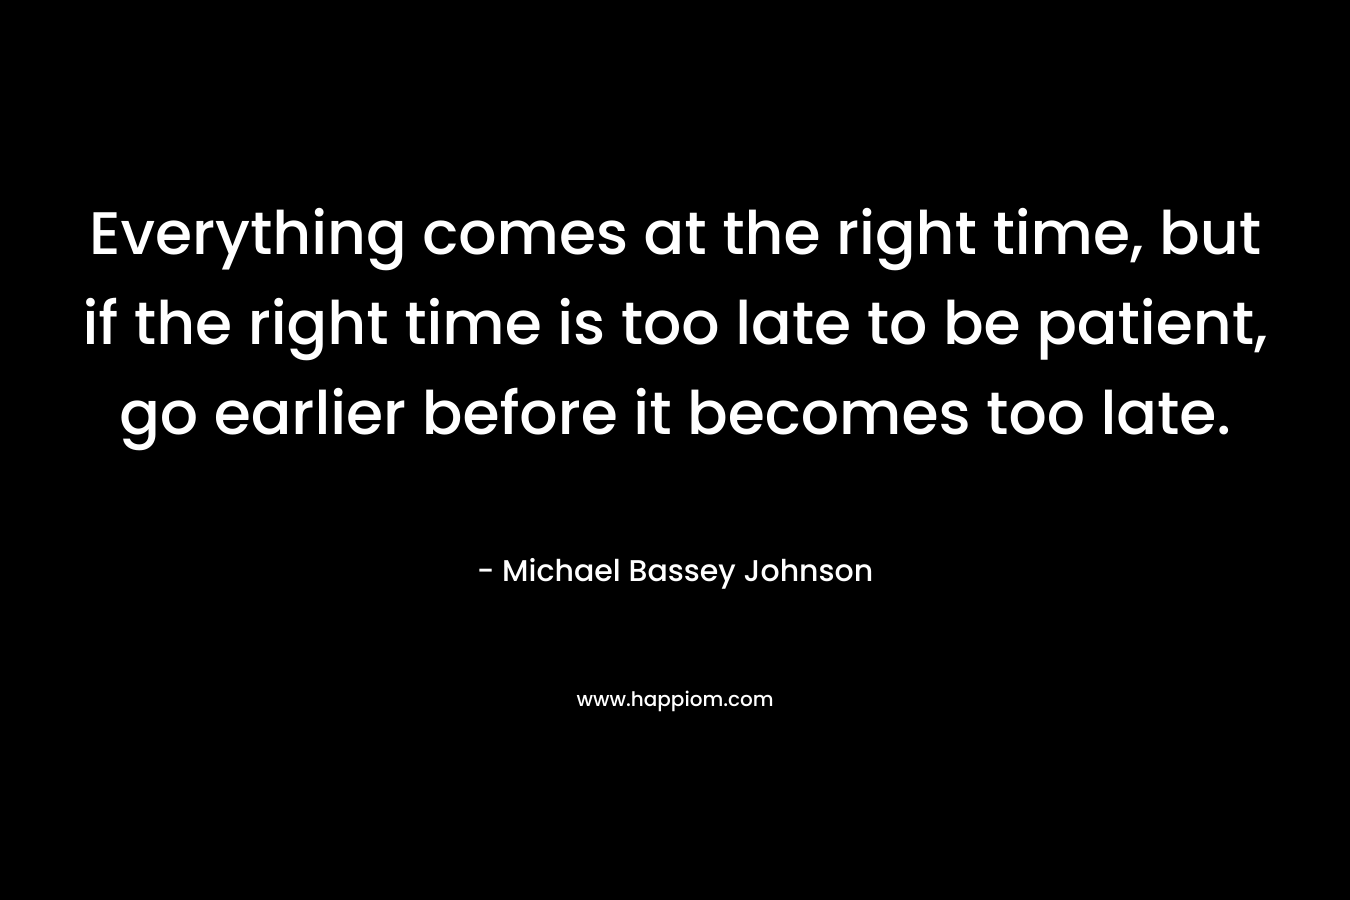 Everything comes at the right time, but if the right time is too late to be patient, go earlier before it becomes too late.